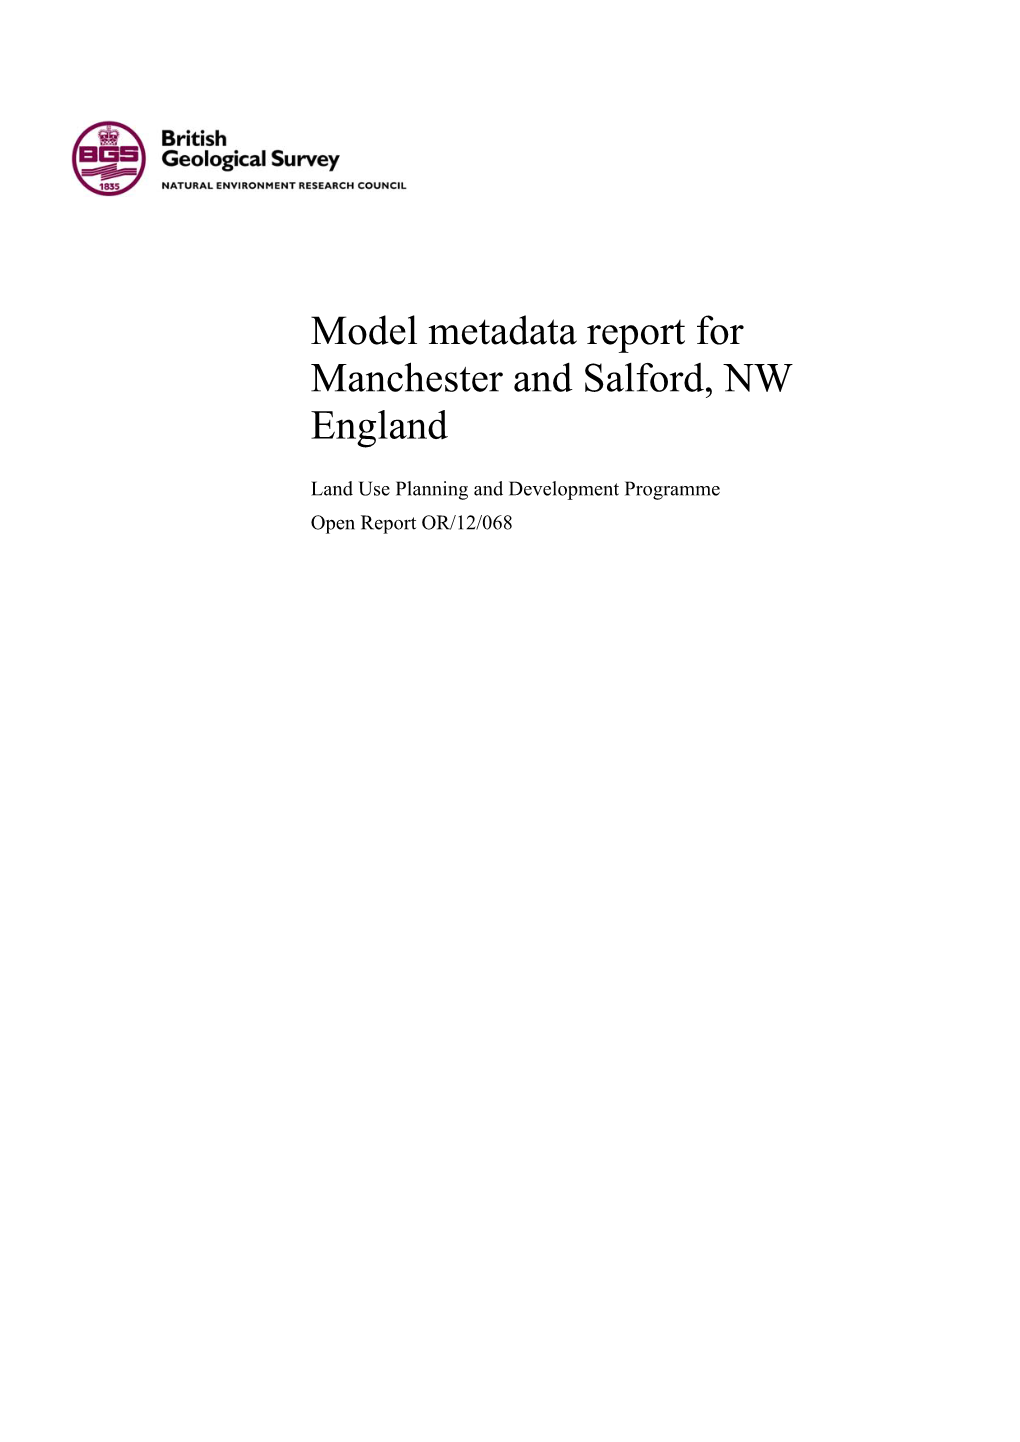 Model Metadata Report for Manchester and Salford, NW England